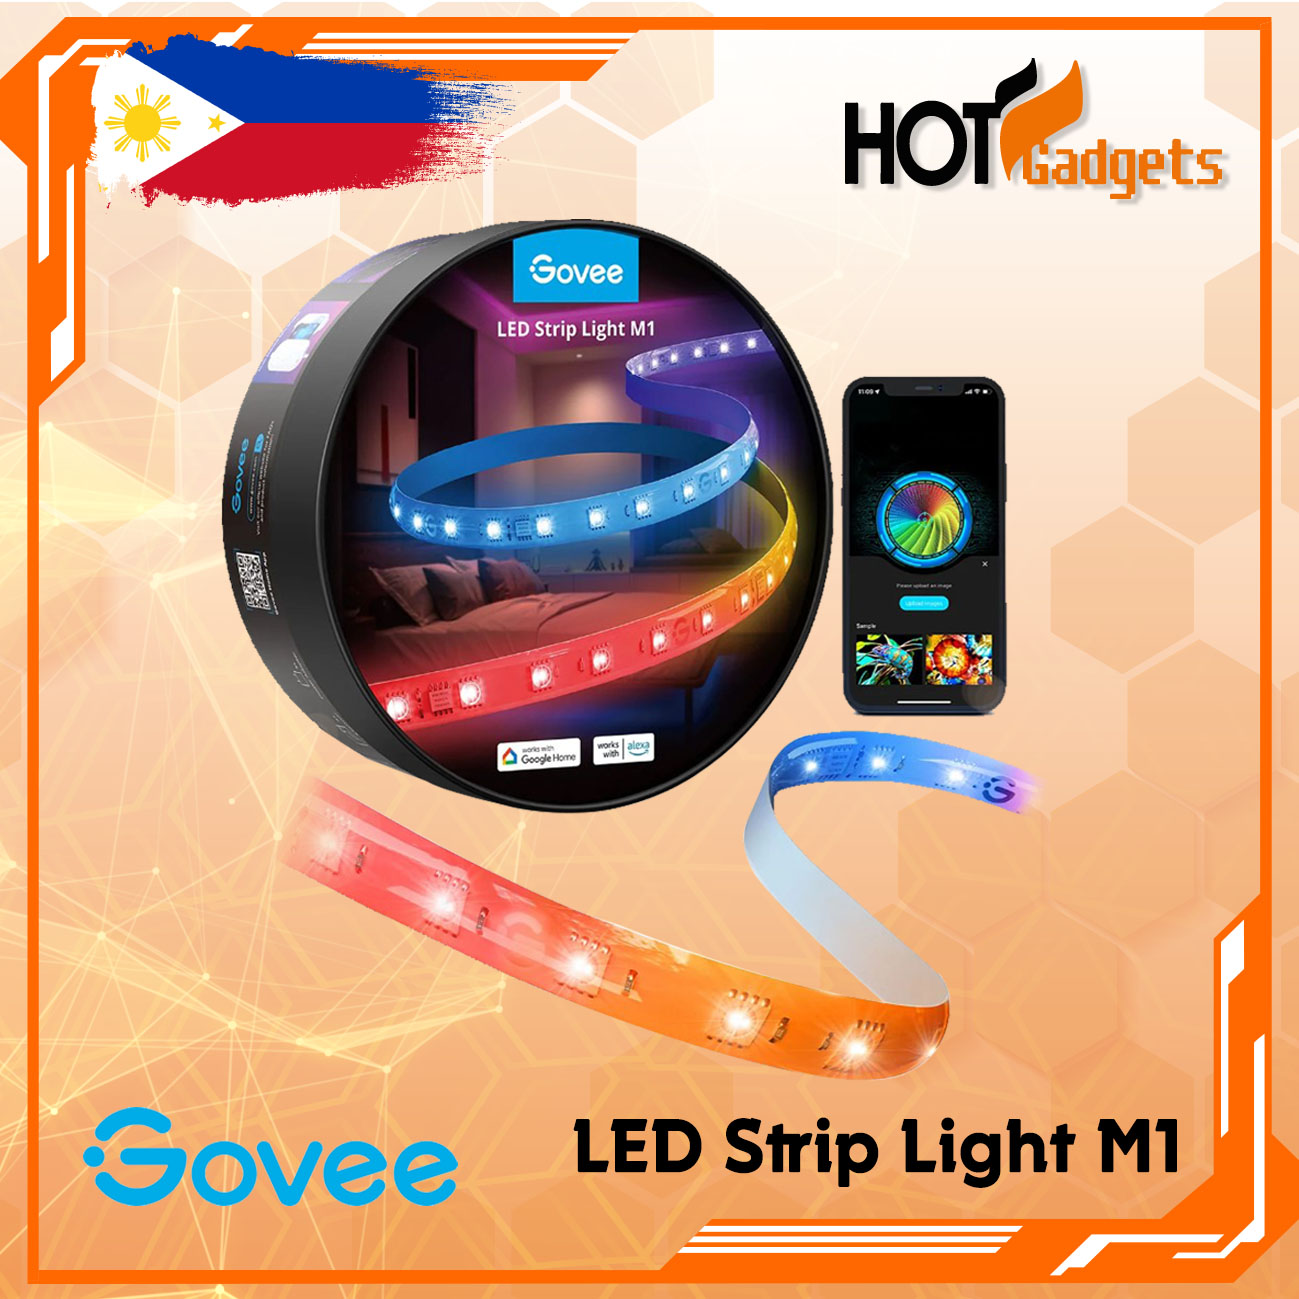 Govee LED Strip Light M1 smart lights come with advanced color 4-in-1  RGBIC+ technology » Gadget Flow